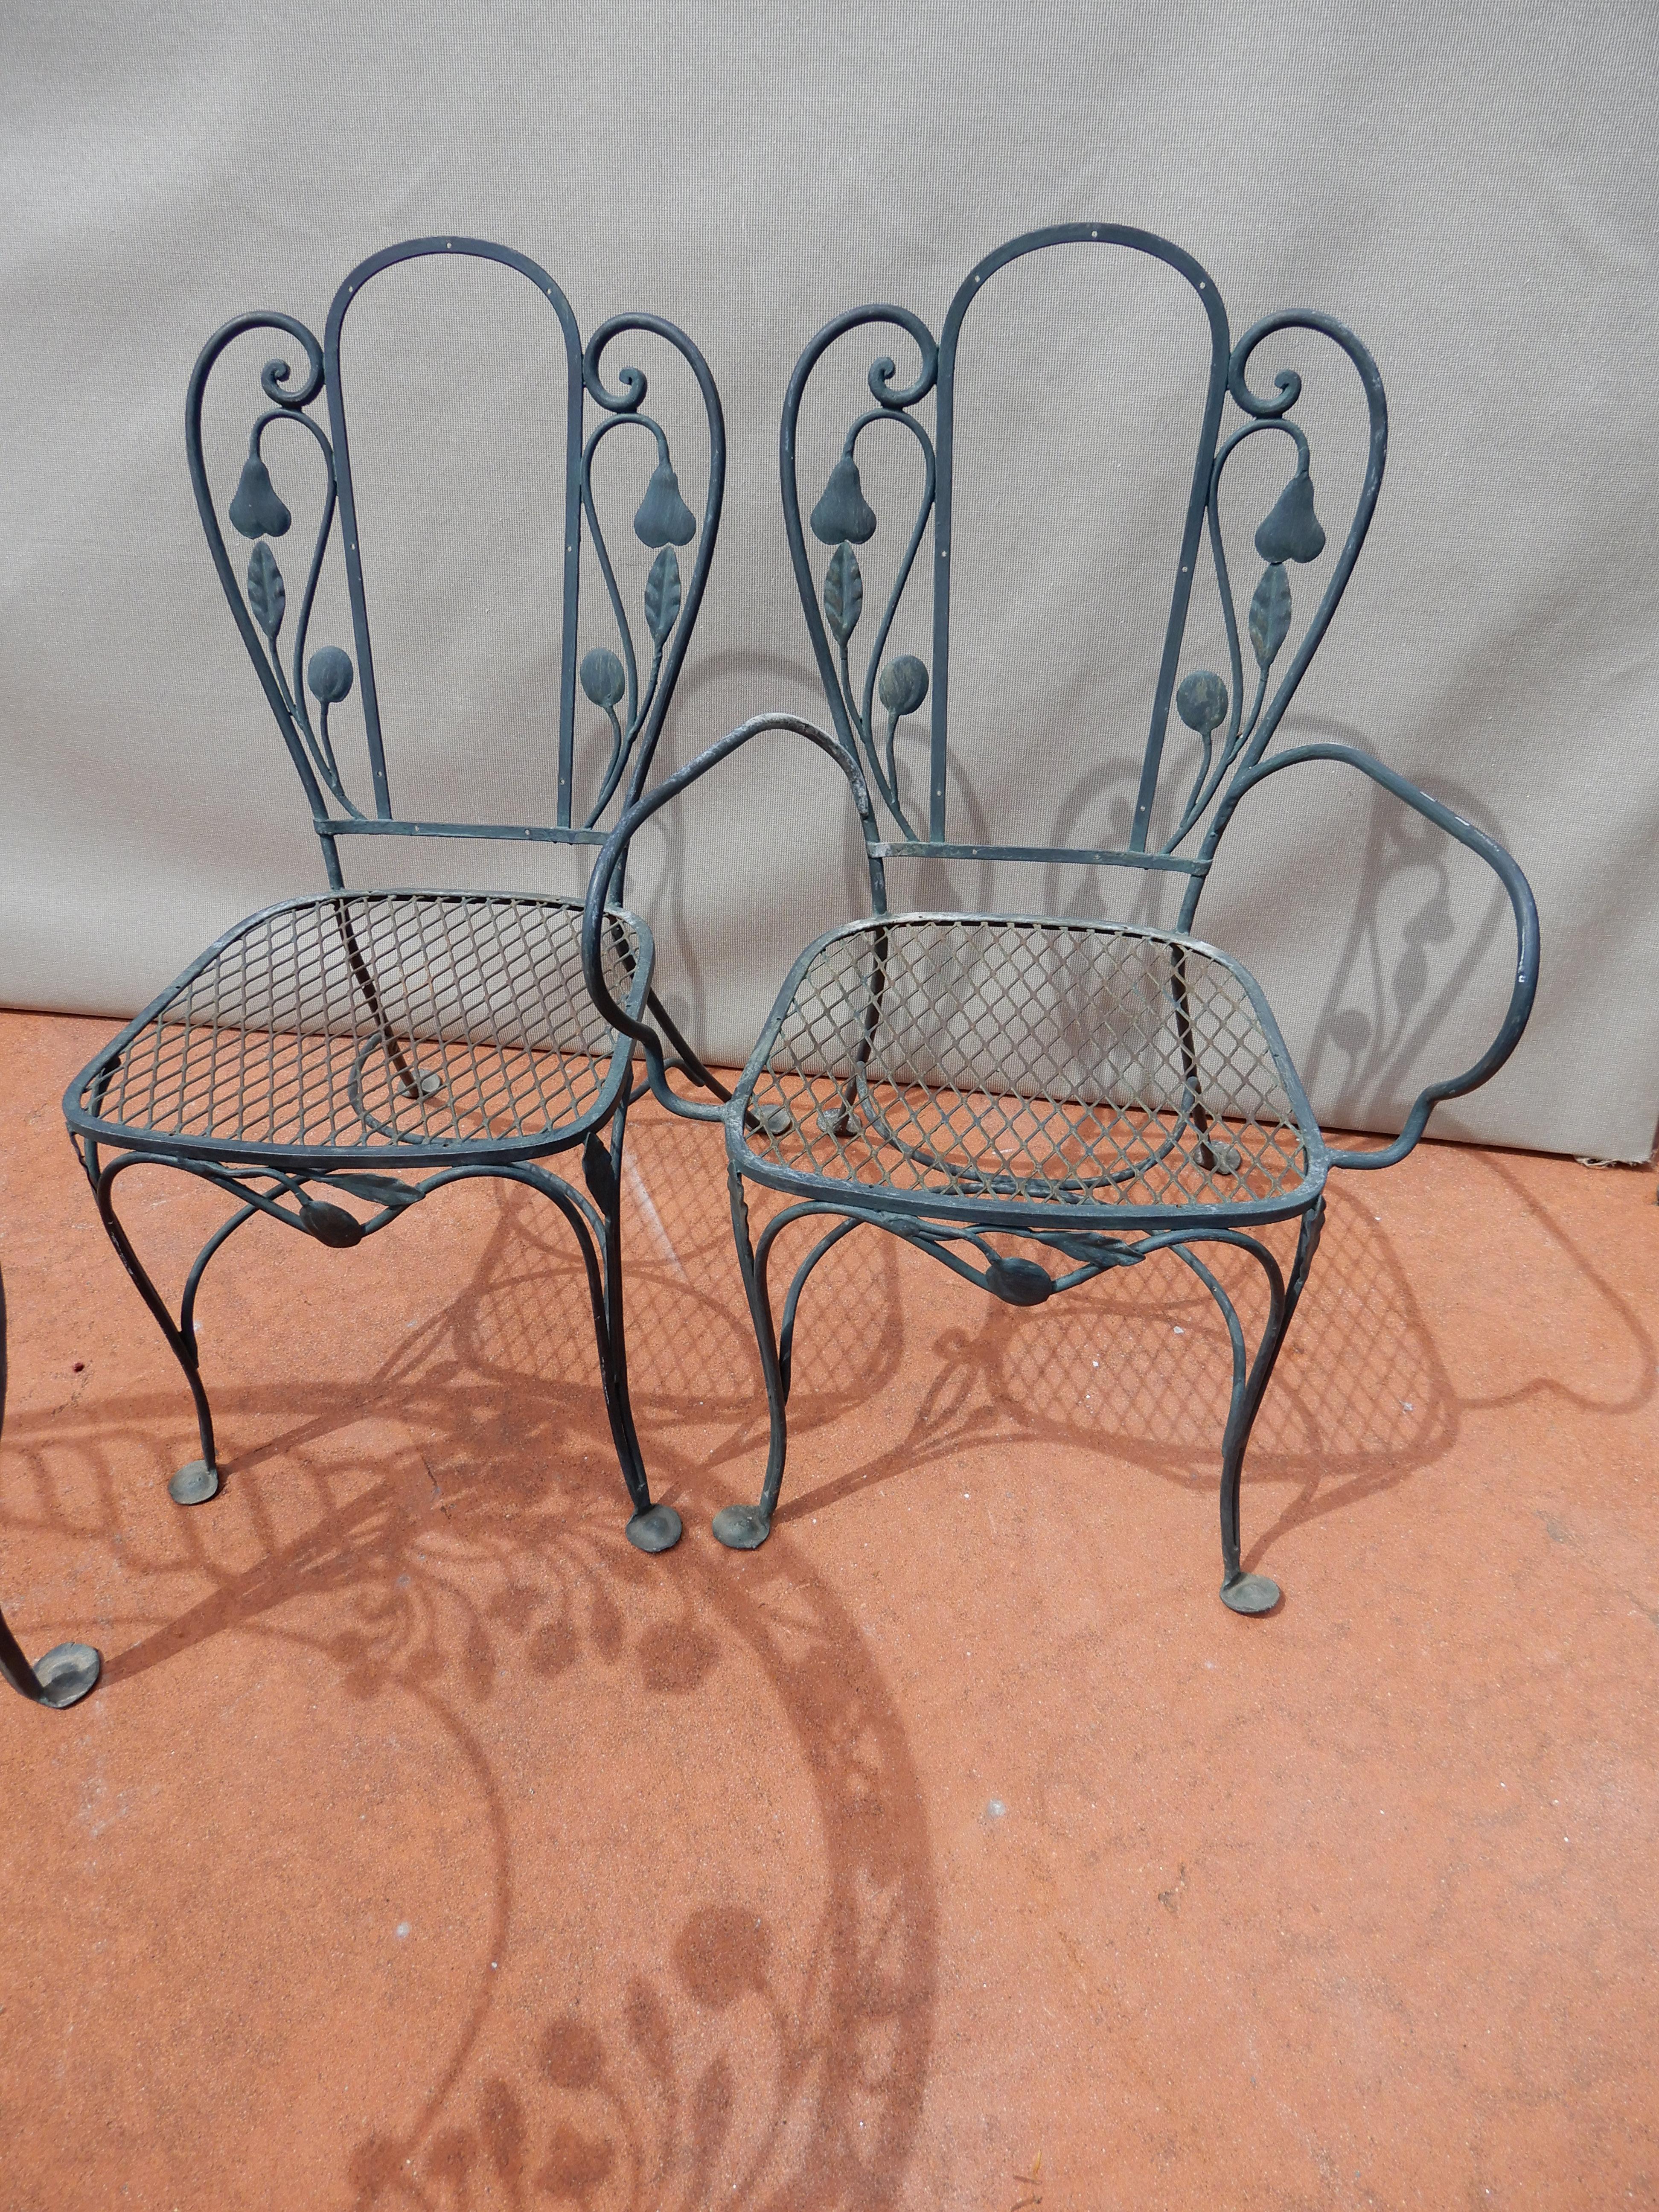 A 7-piece wrought iron Salterini Della Robbia wrought iron dining set with glass top not shown
Also, the 2nd image is from the other dining set.